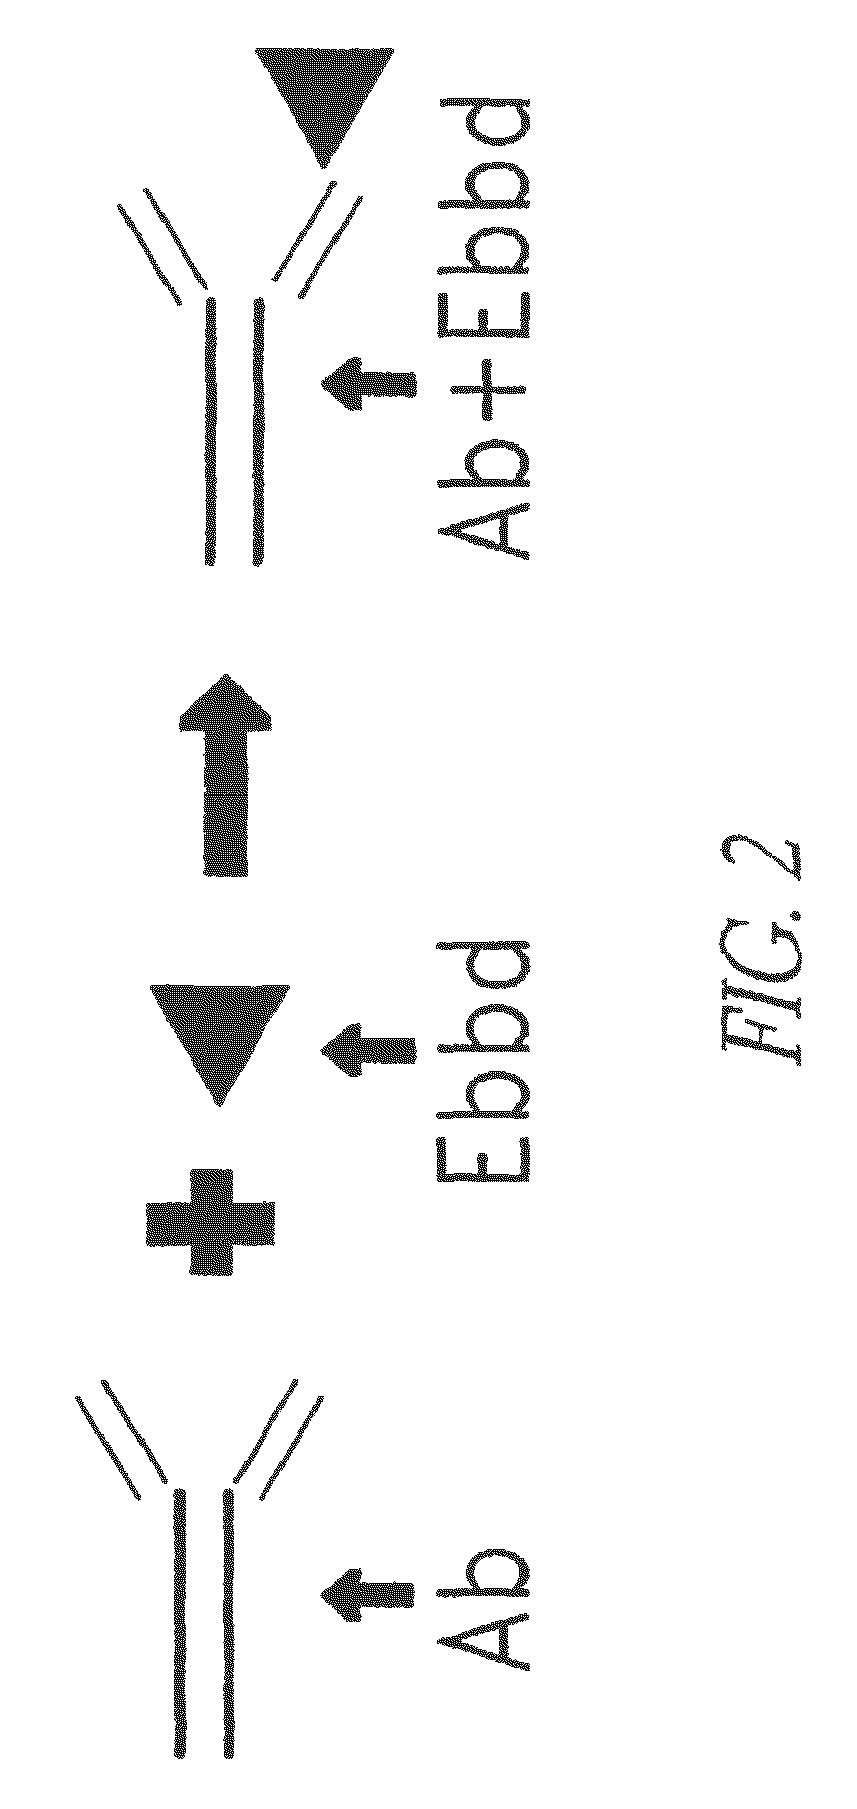 Modular targeted therapeutic agents and methods of making same